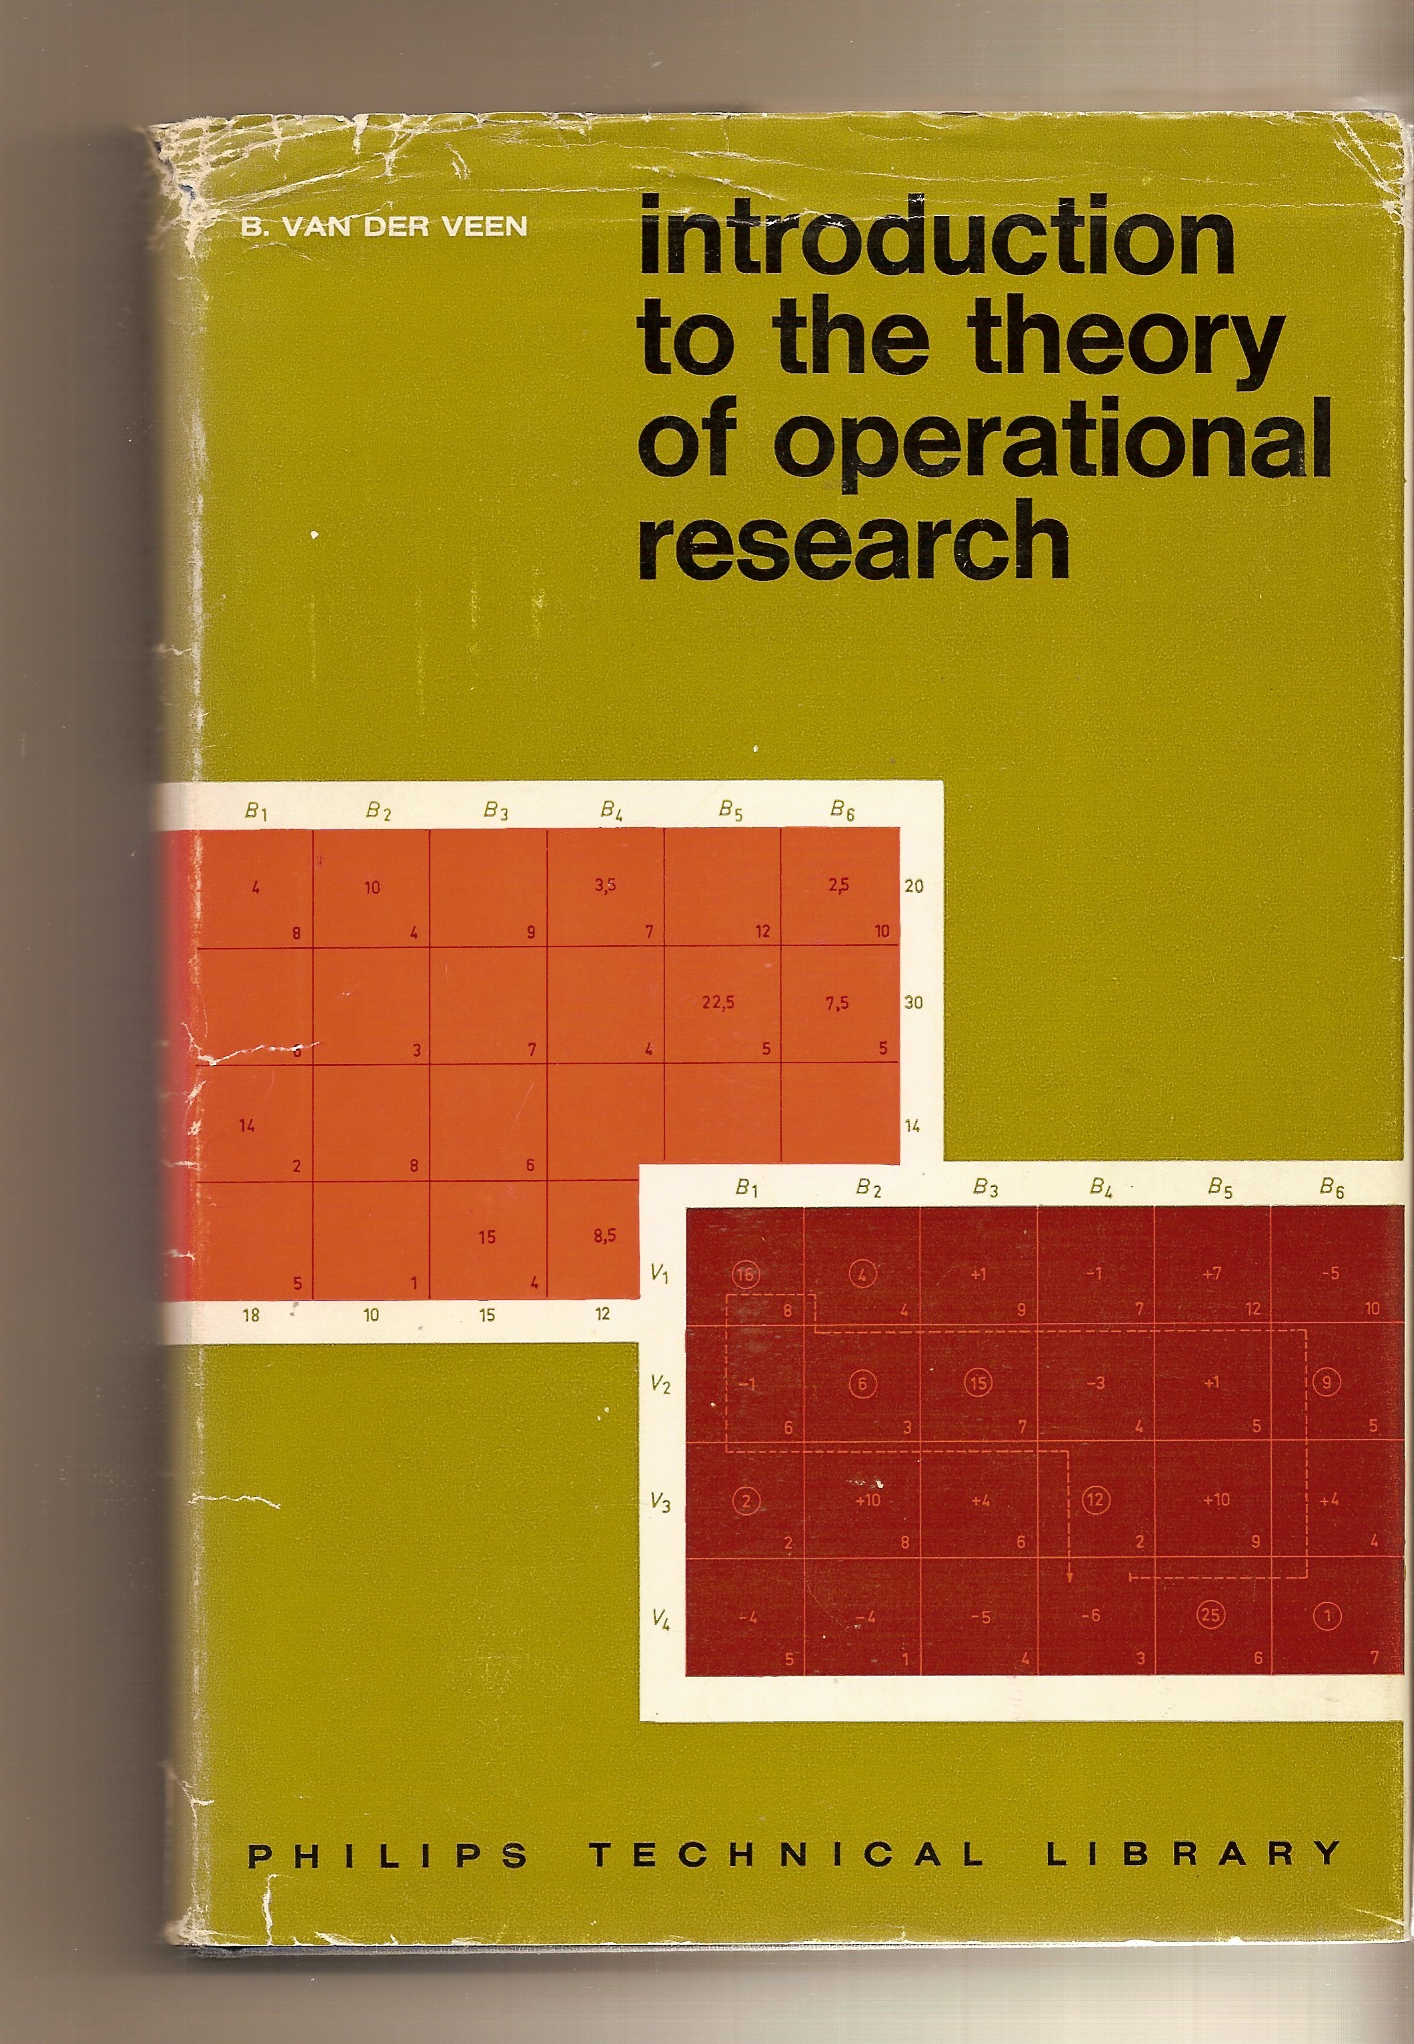 VAN DER VEEN B. - Introduction to the Theory of Operational Research